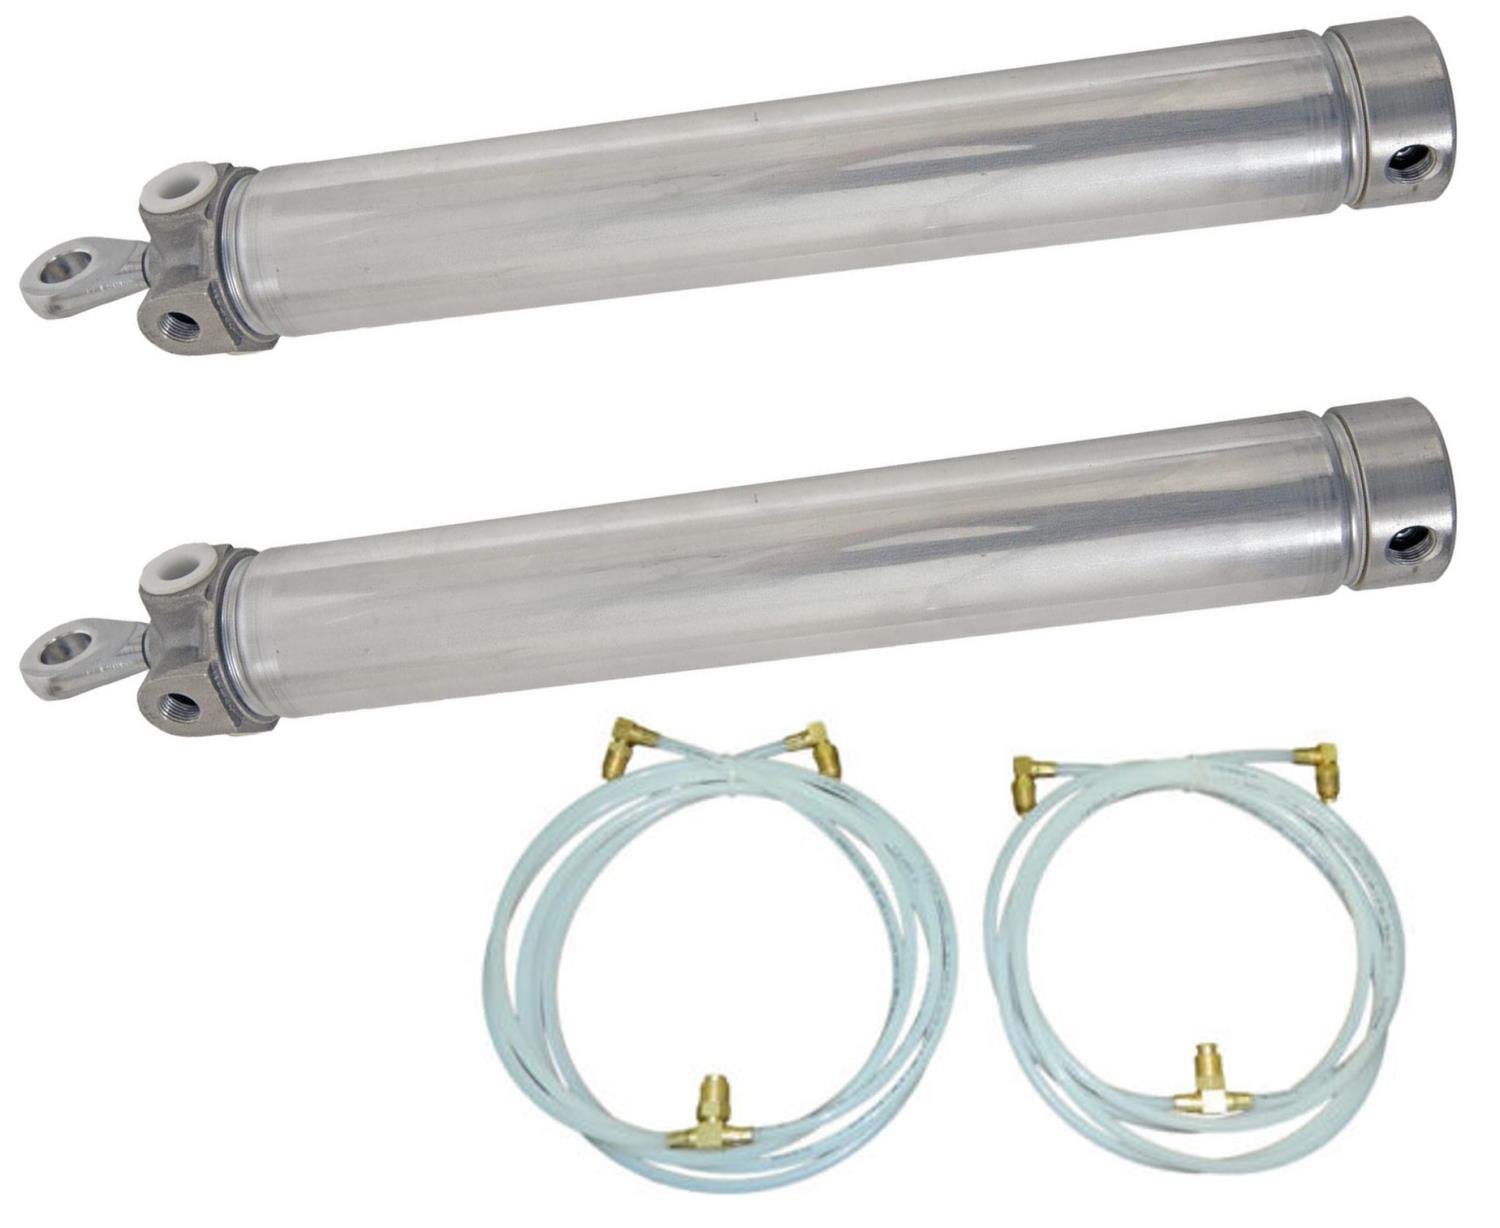 Convertible Top Cylinder & Hose Kit for 1964-1967 GM A-Body Convertibles [Sold as a Kit]